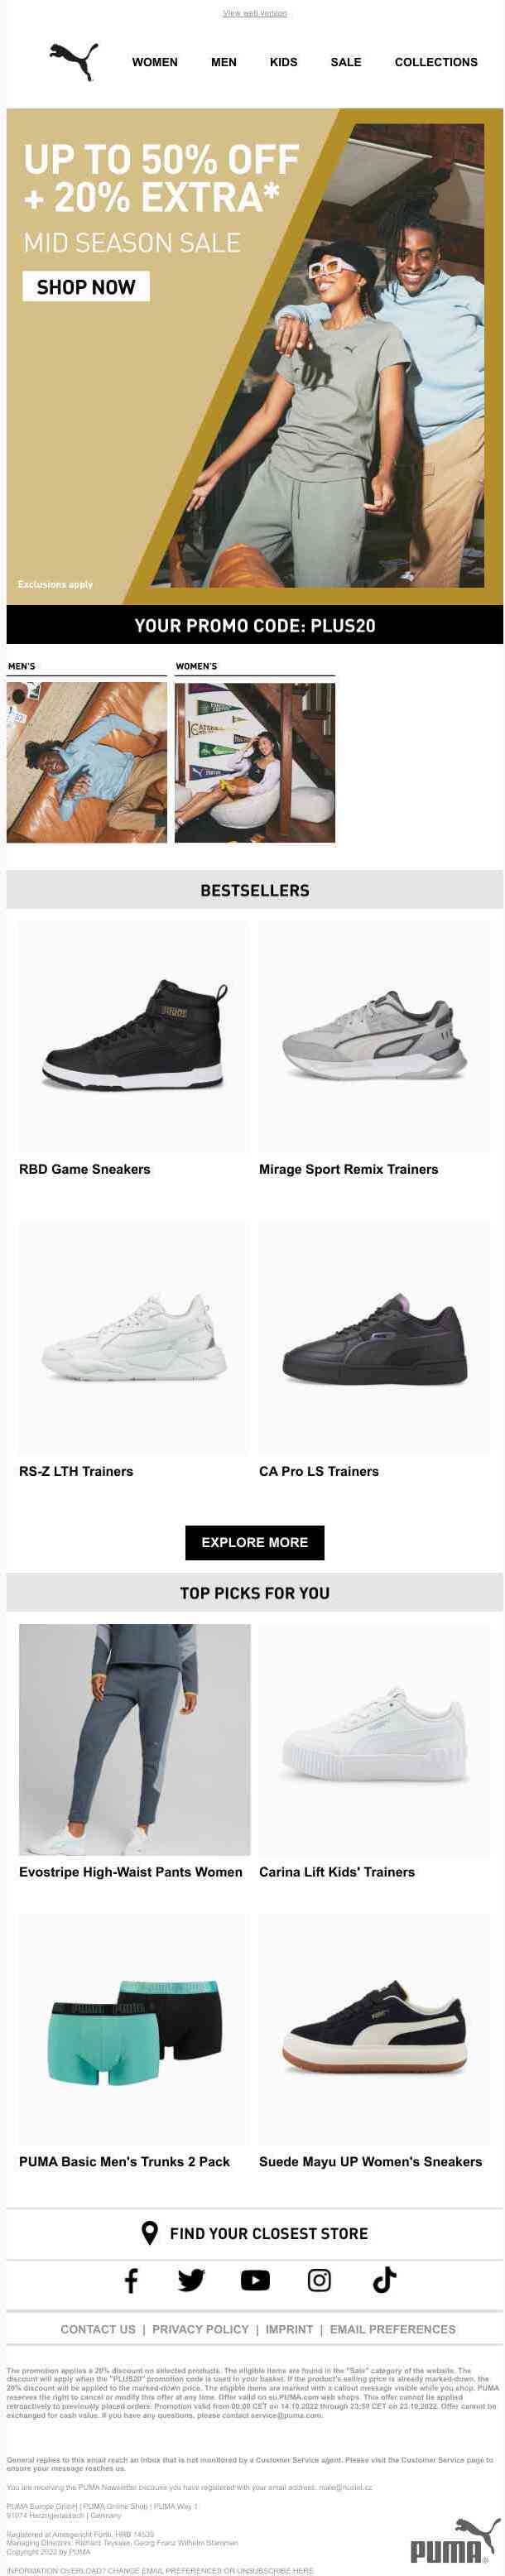 Up To 50% Off + 20% Extra* Off Your New Sneakers